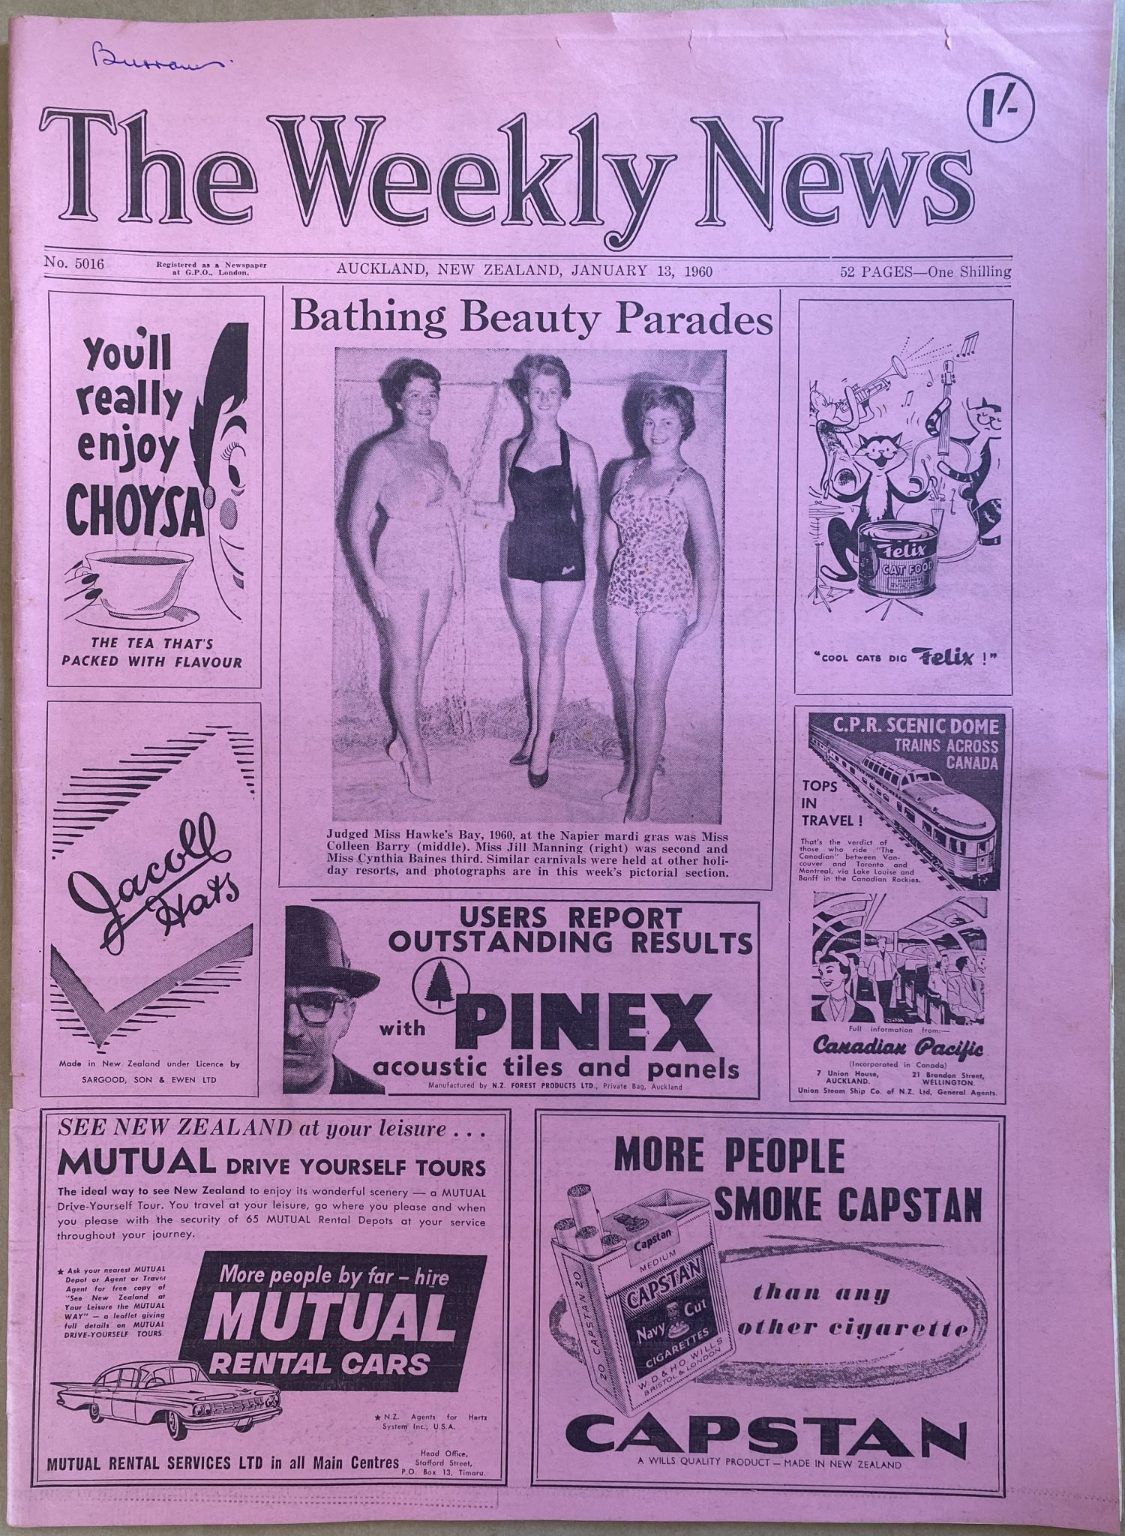 OLD NEWSPAPER: The Weekly News, No. 5016, 13 January 1960